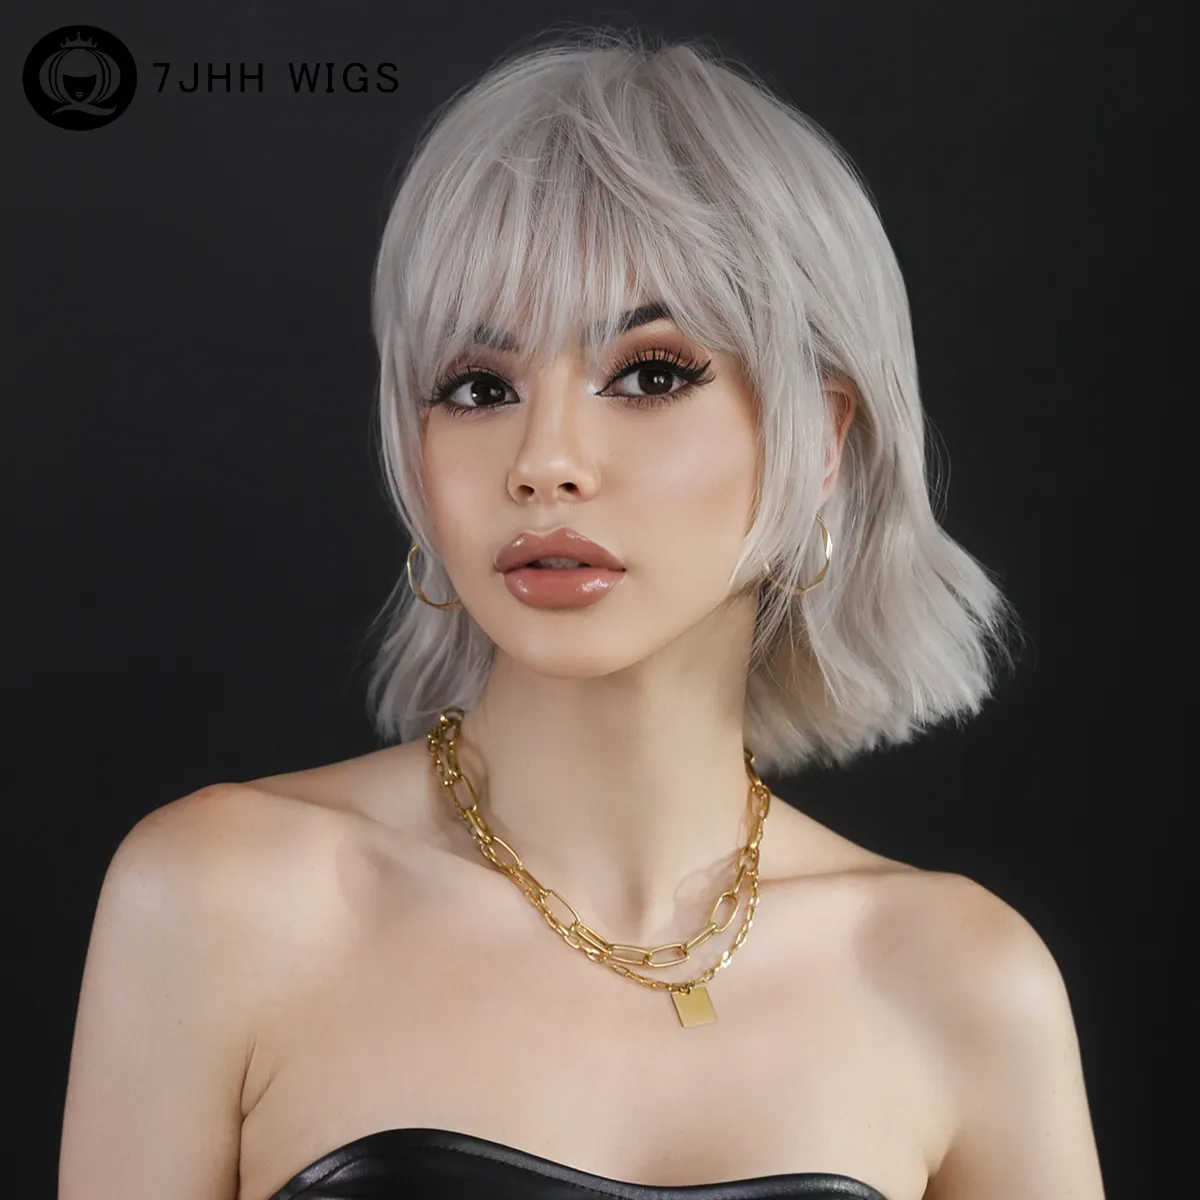 Pixie Cut Hair Wigs with Bangs Ombre Platinum Light Pink Color Wigs Cute Bob Short Layered Wavy Hair 12in Women's Wig Wholesale